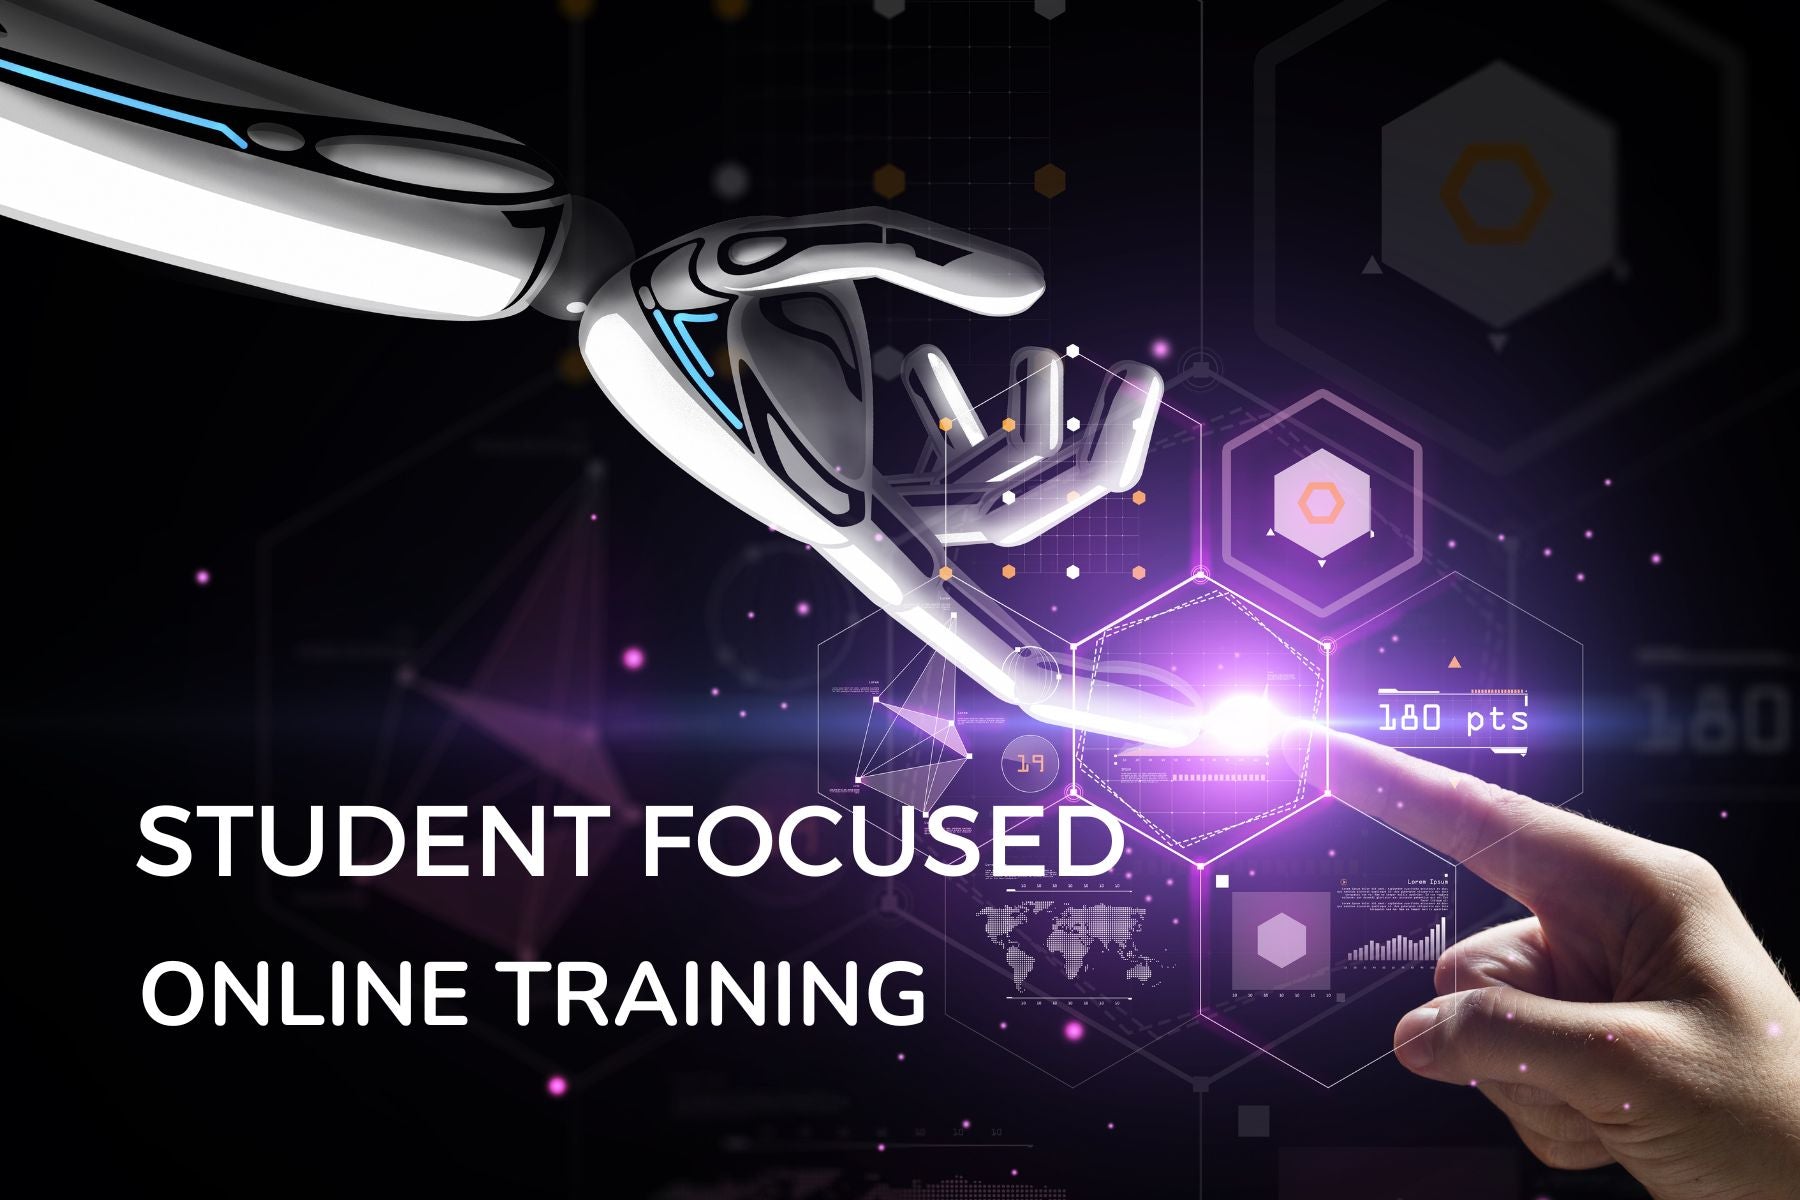 Enhanced Online Training Experience With Nhung Phan